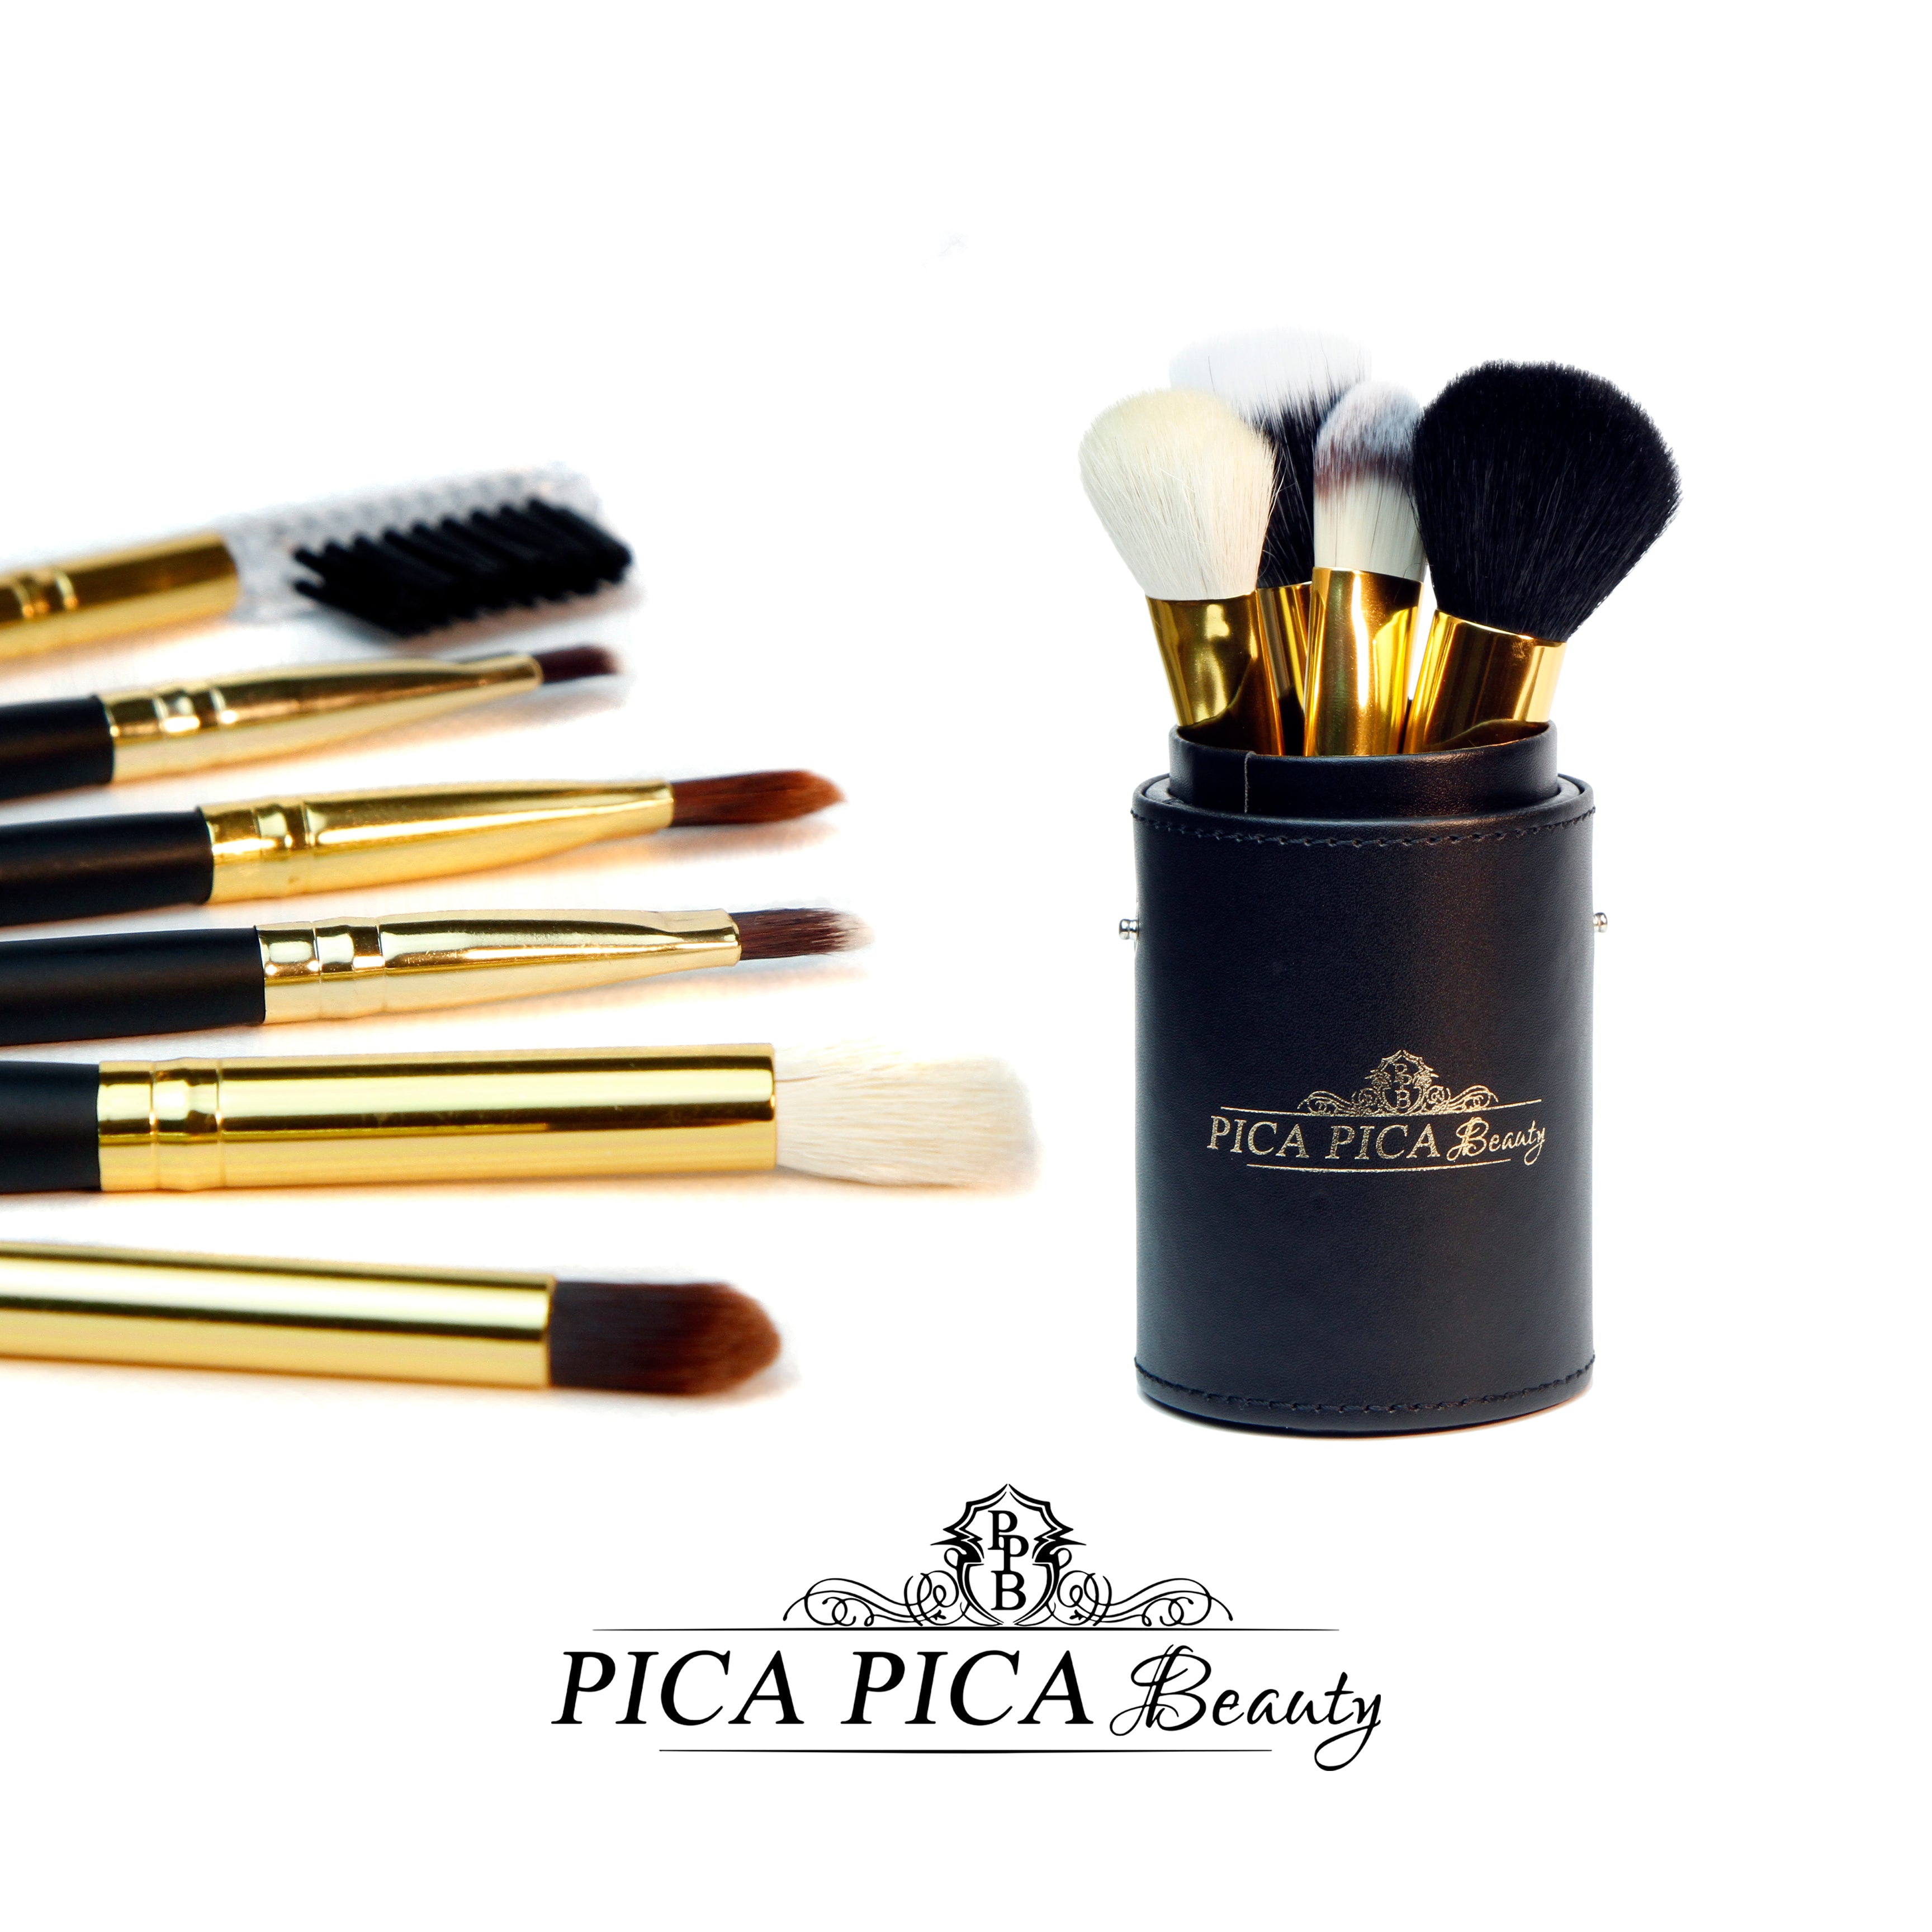 LIMITED EDITION Pica Pica Beauty All-IN Bundle Set - PicaPicaBeauty 